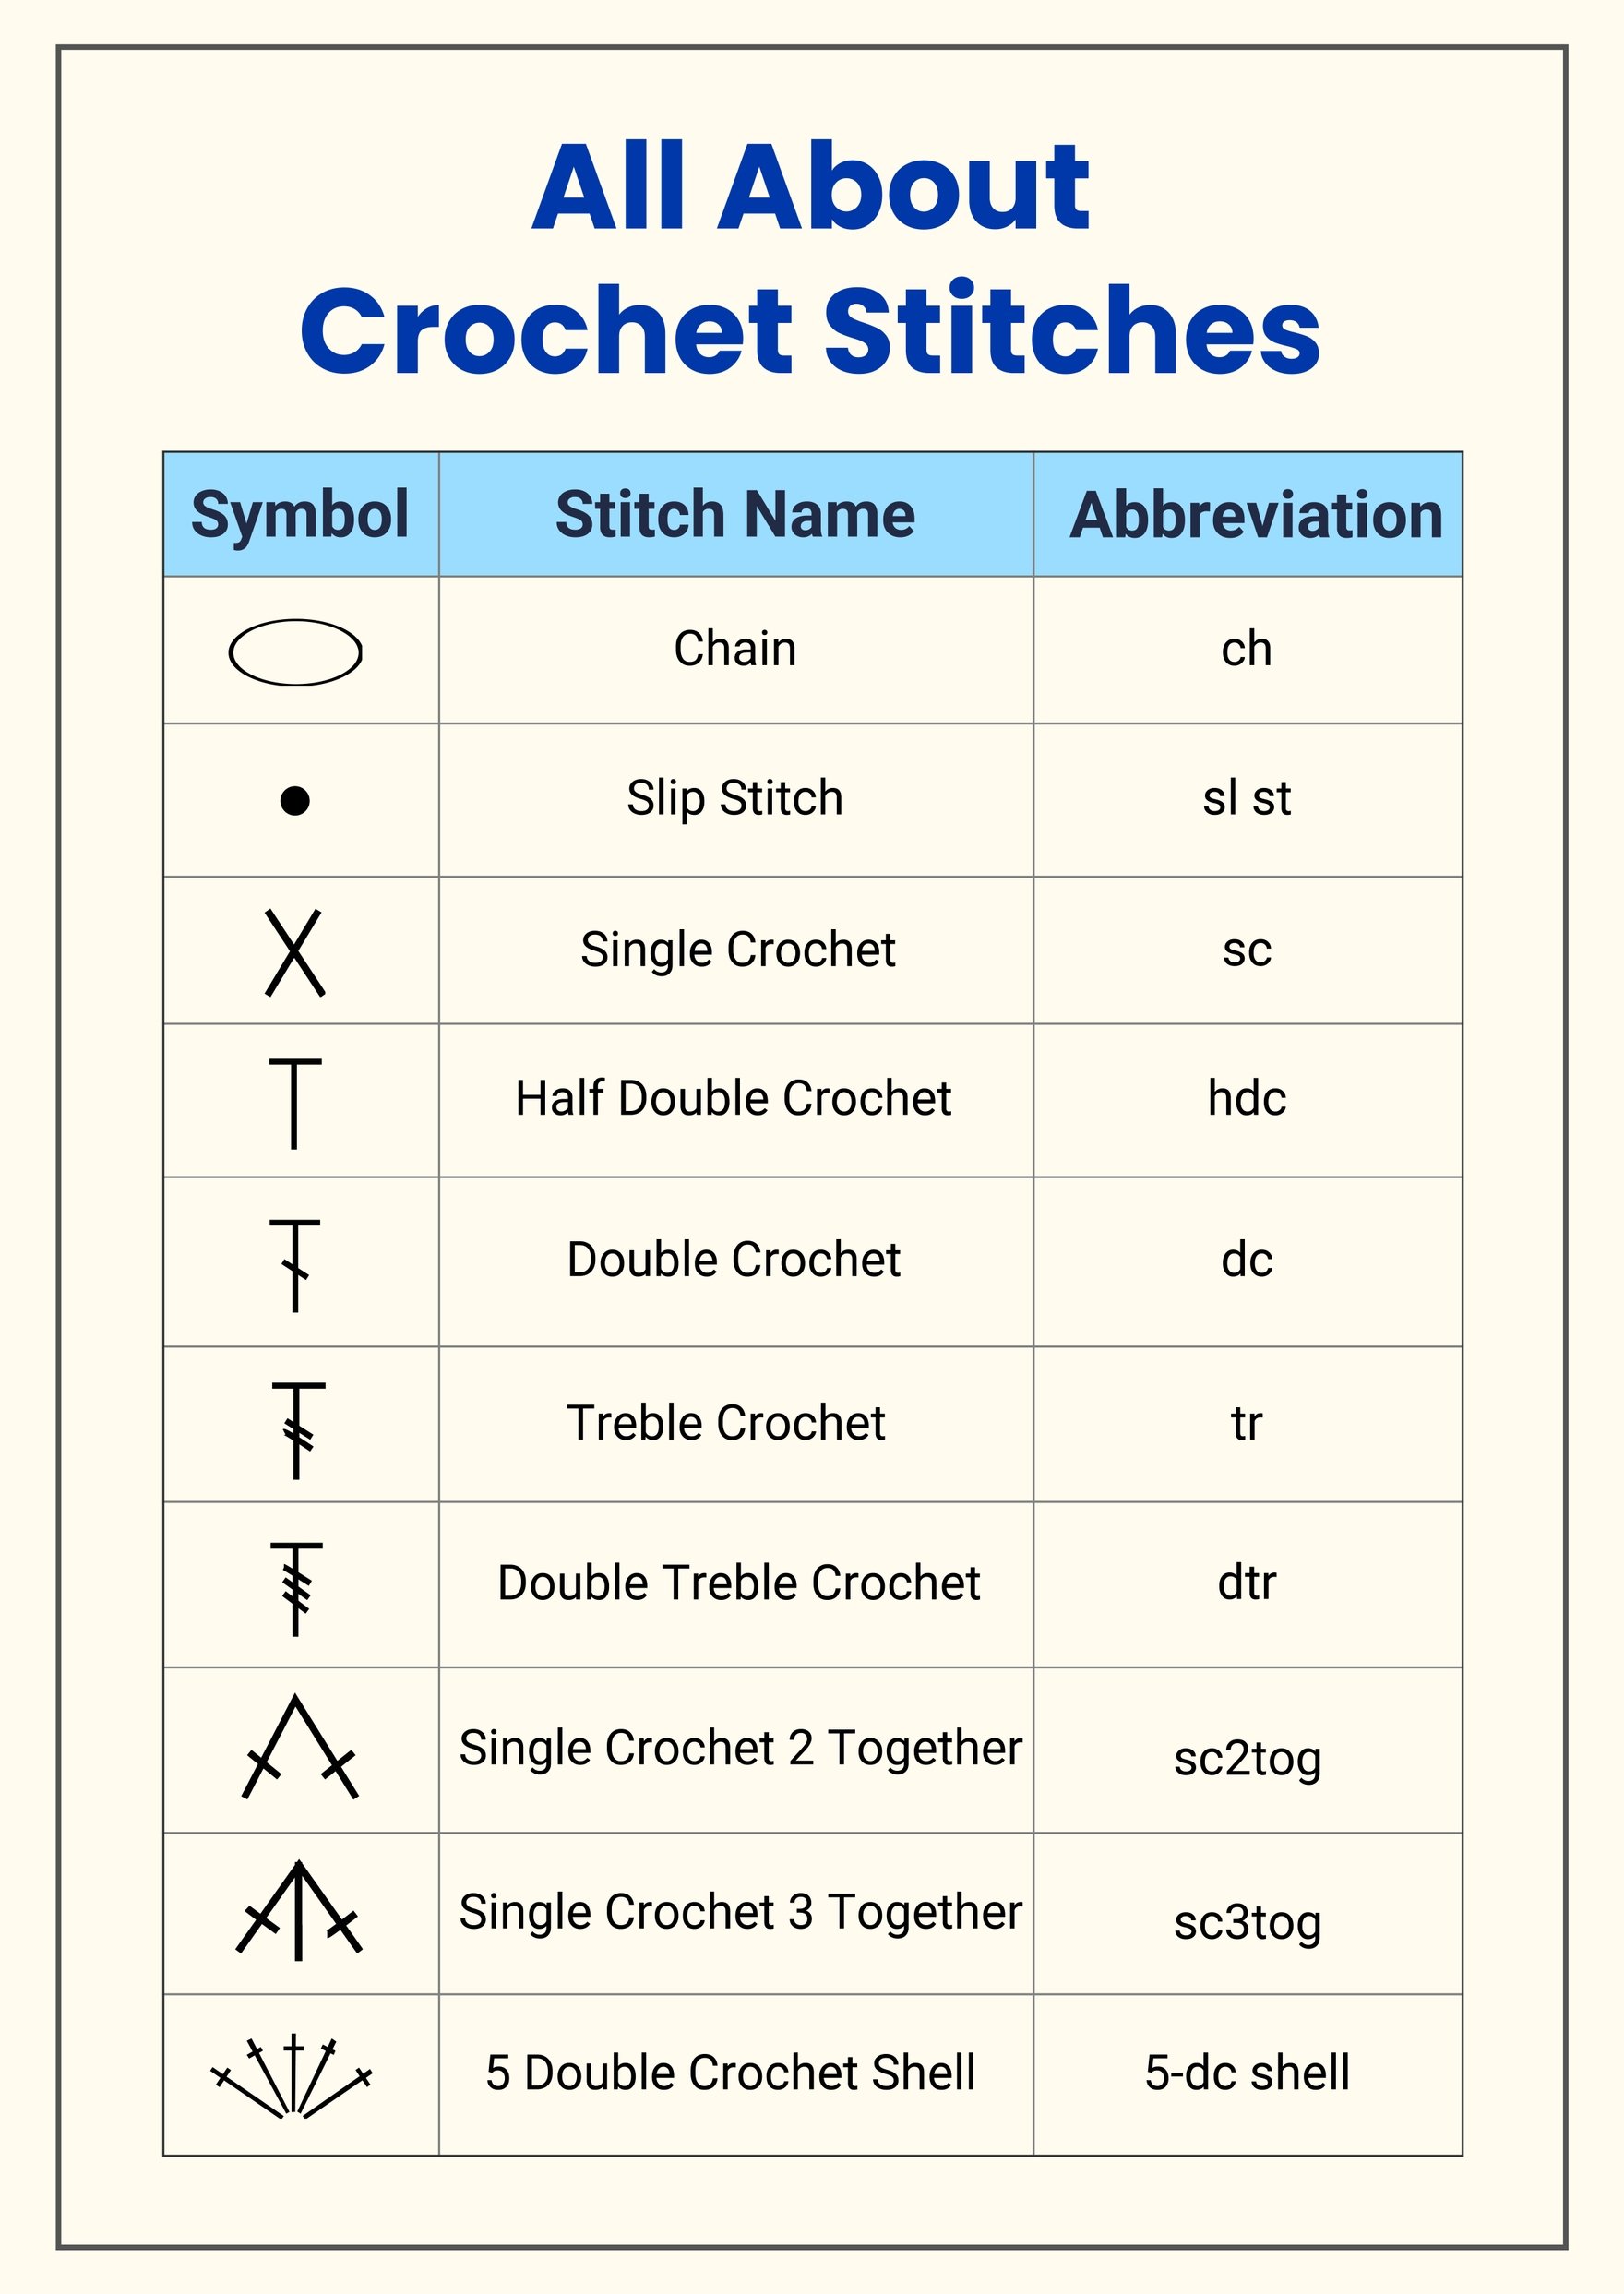 All About Crochet Reference Chart